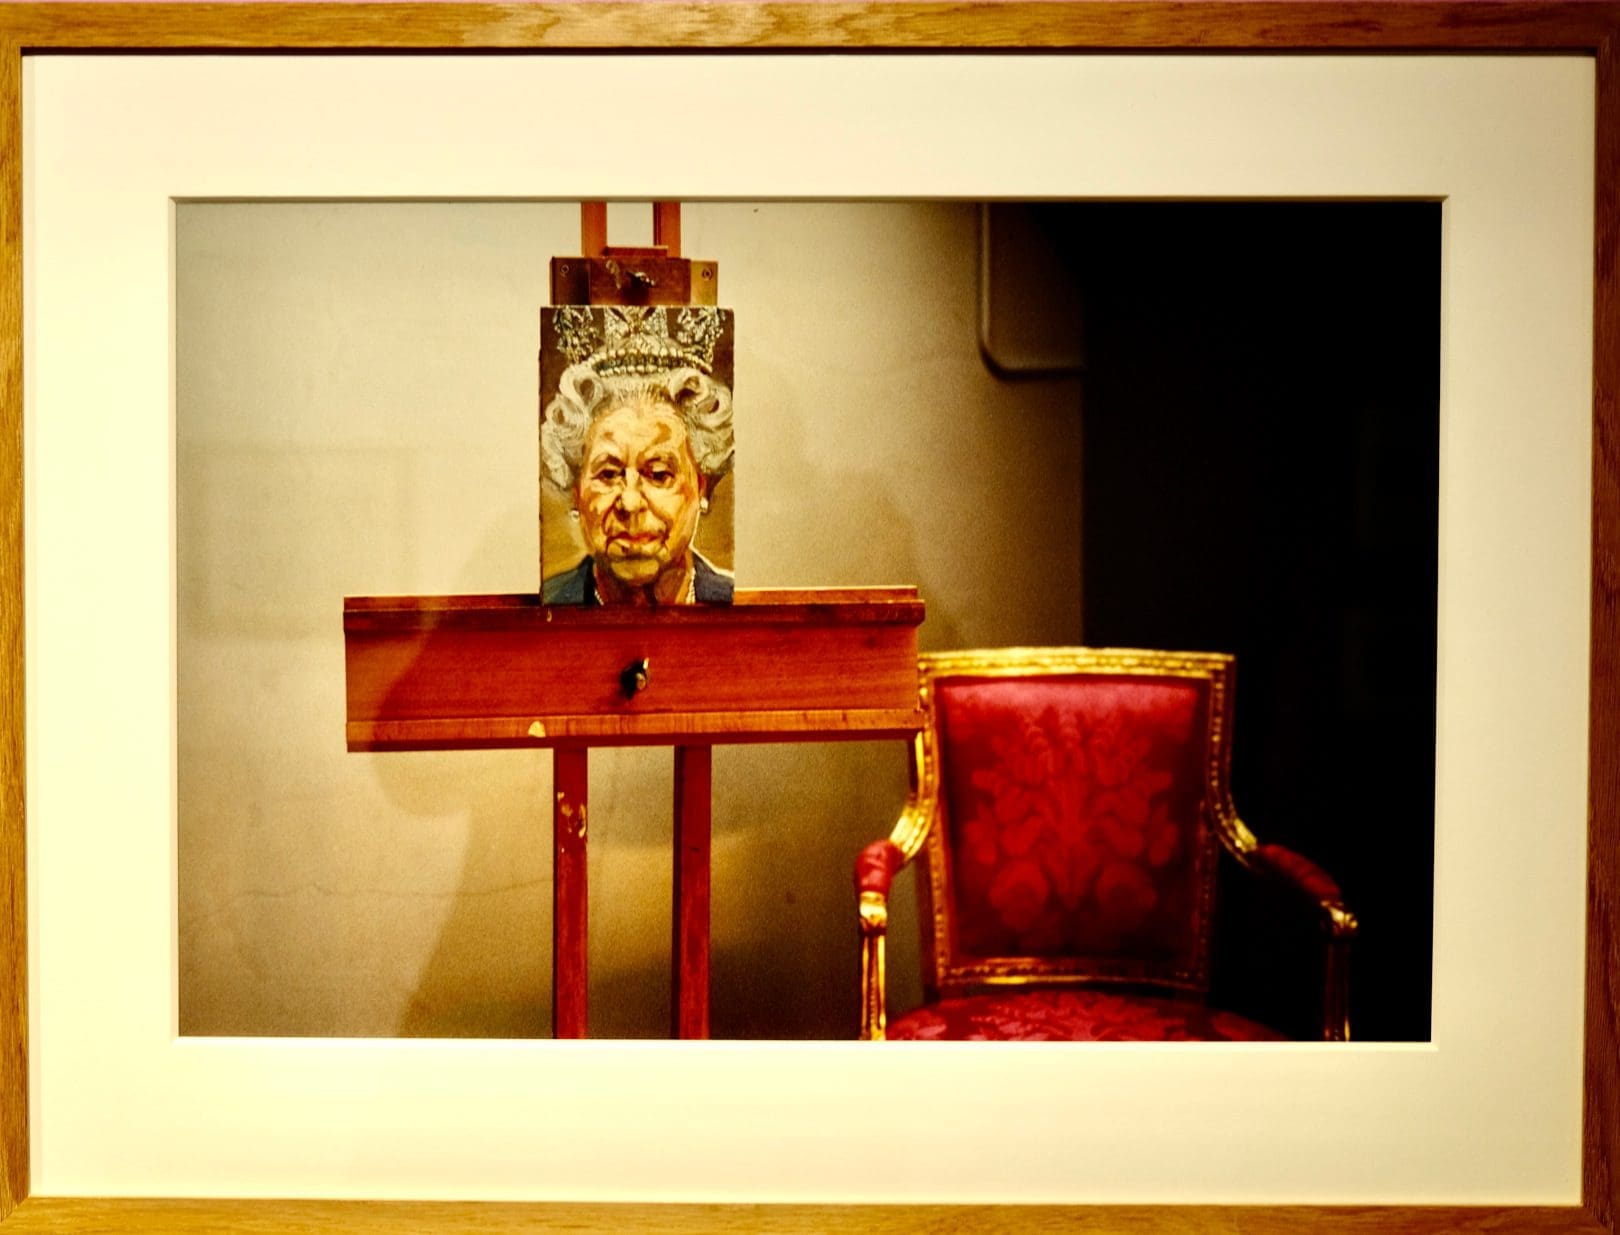 Freud's portrait of the Queen